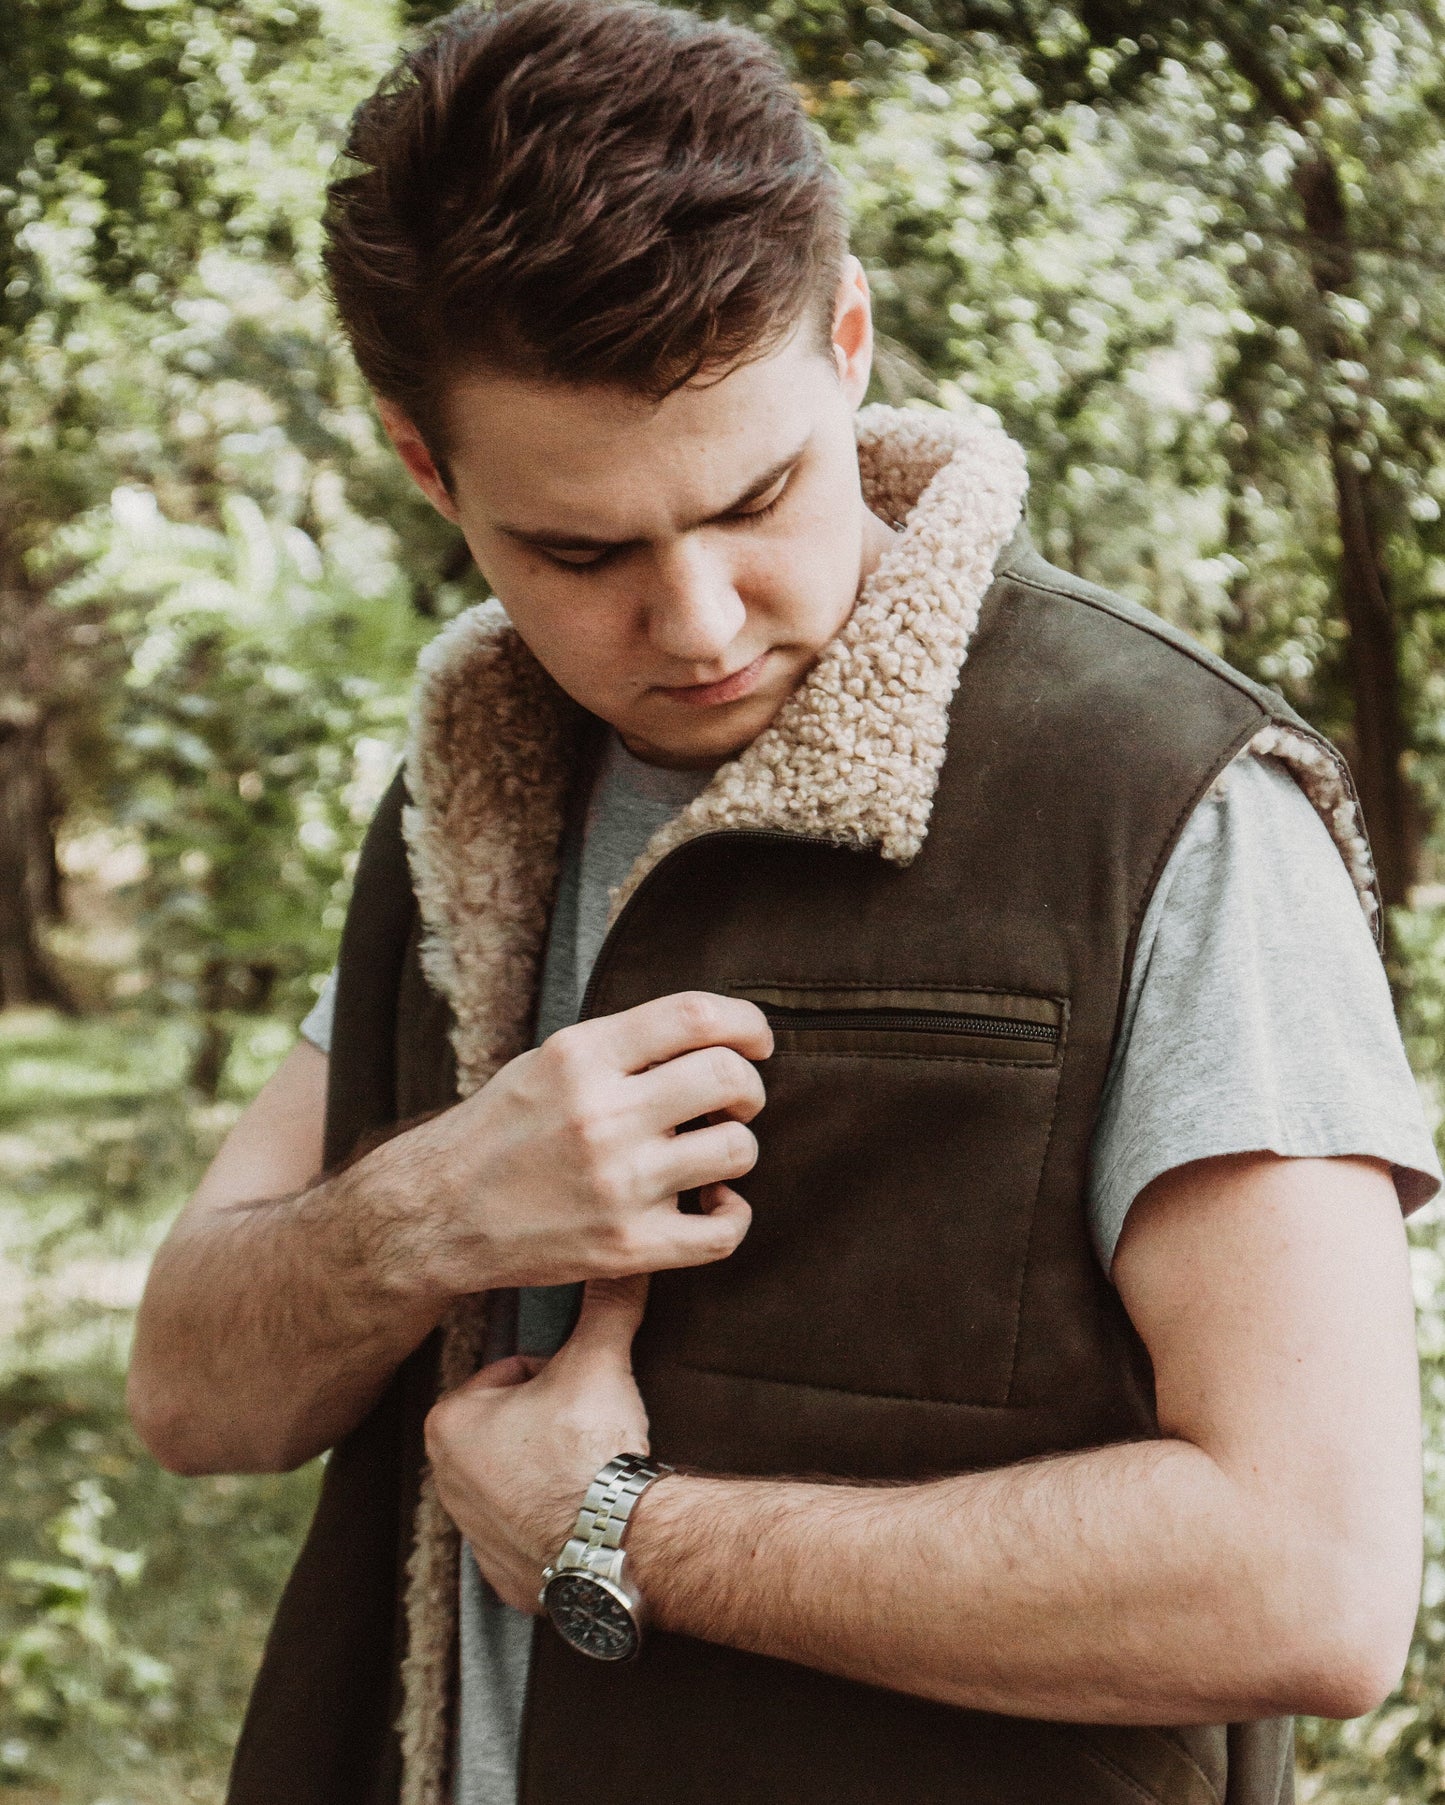 Khaki Sheepskin Vest with Front Zip Pocket and Fur Lining